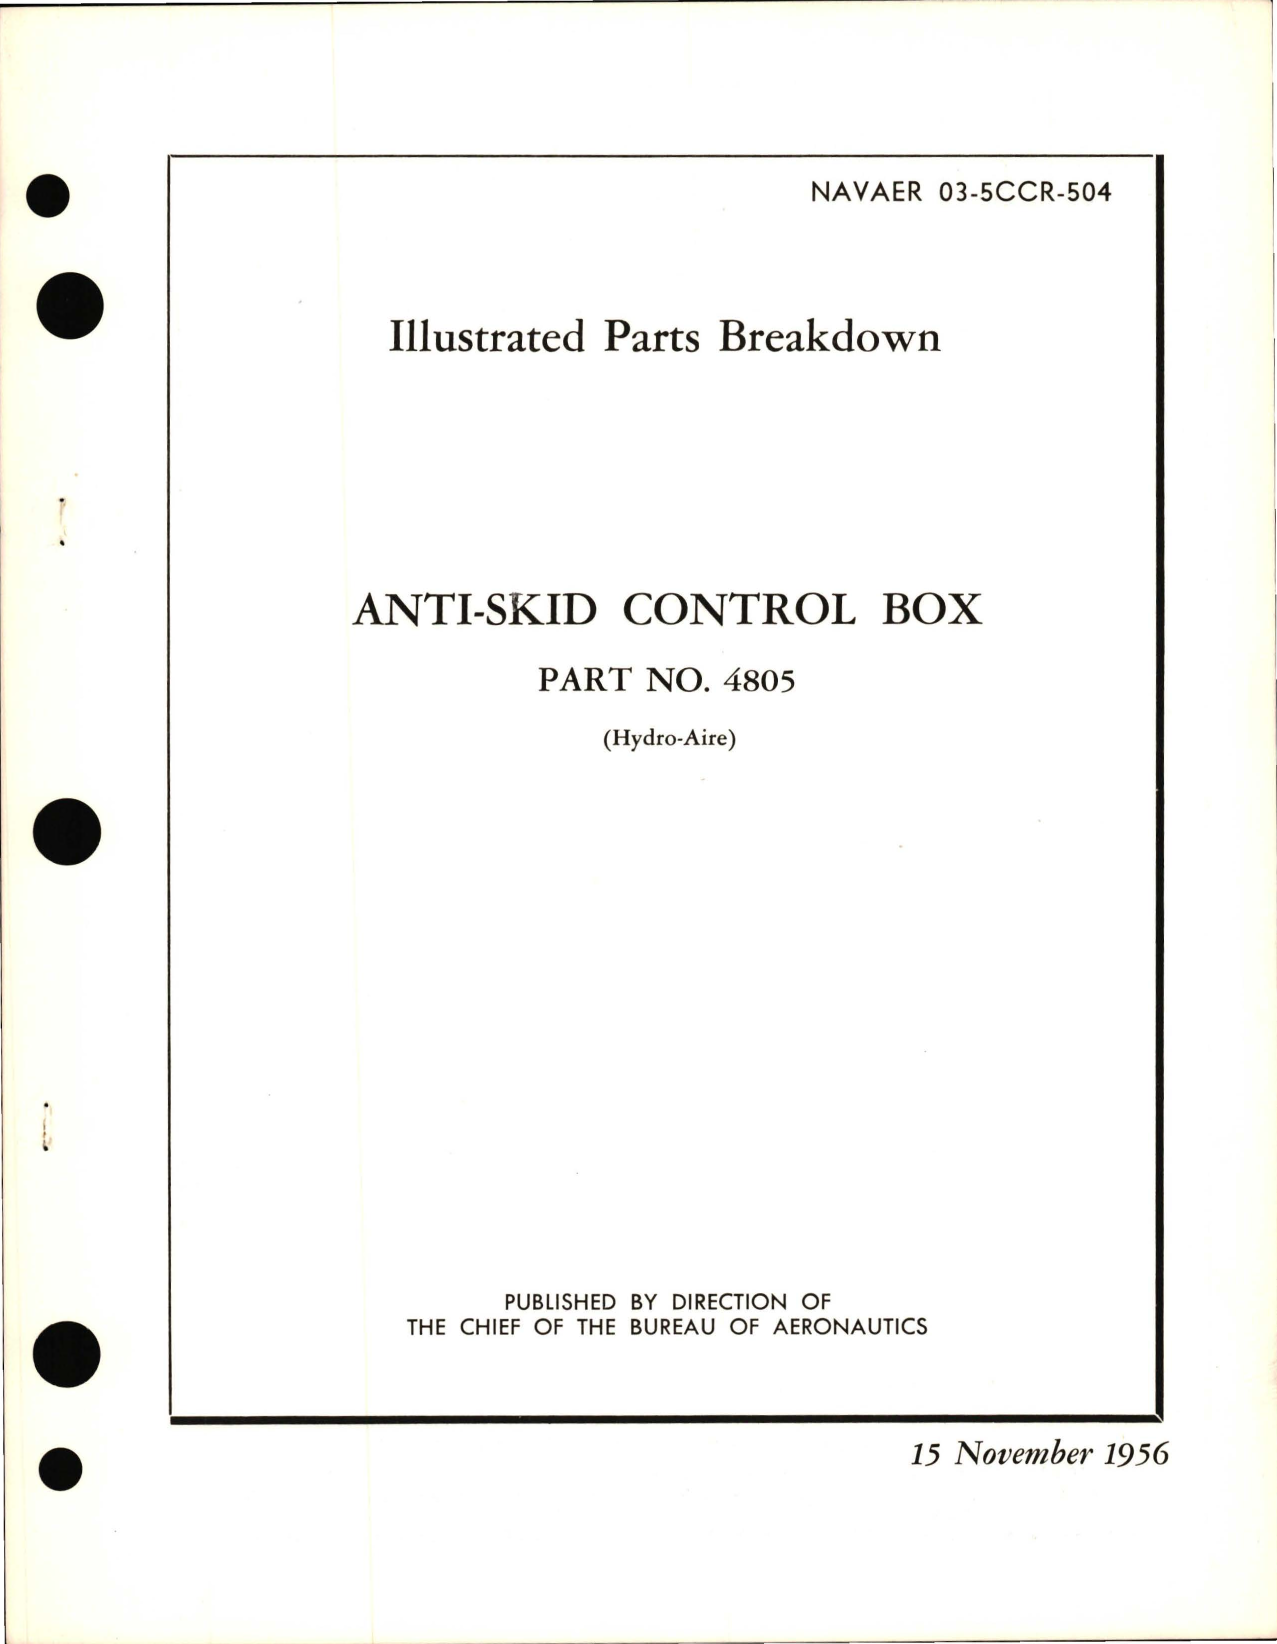 Sample page 1 from AirCorps Library document: Illustrated Parts Breakdown for Anti-Skid Control Box - Part 4805 